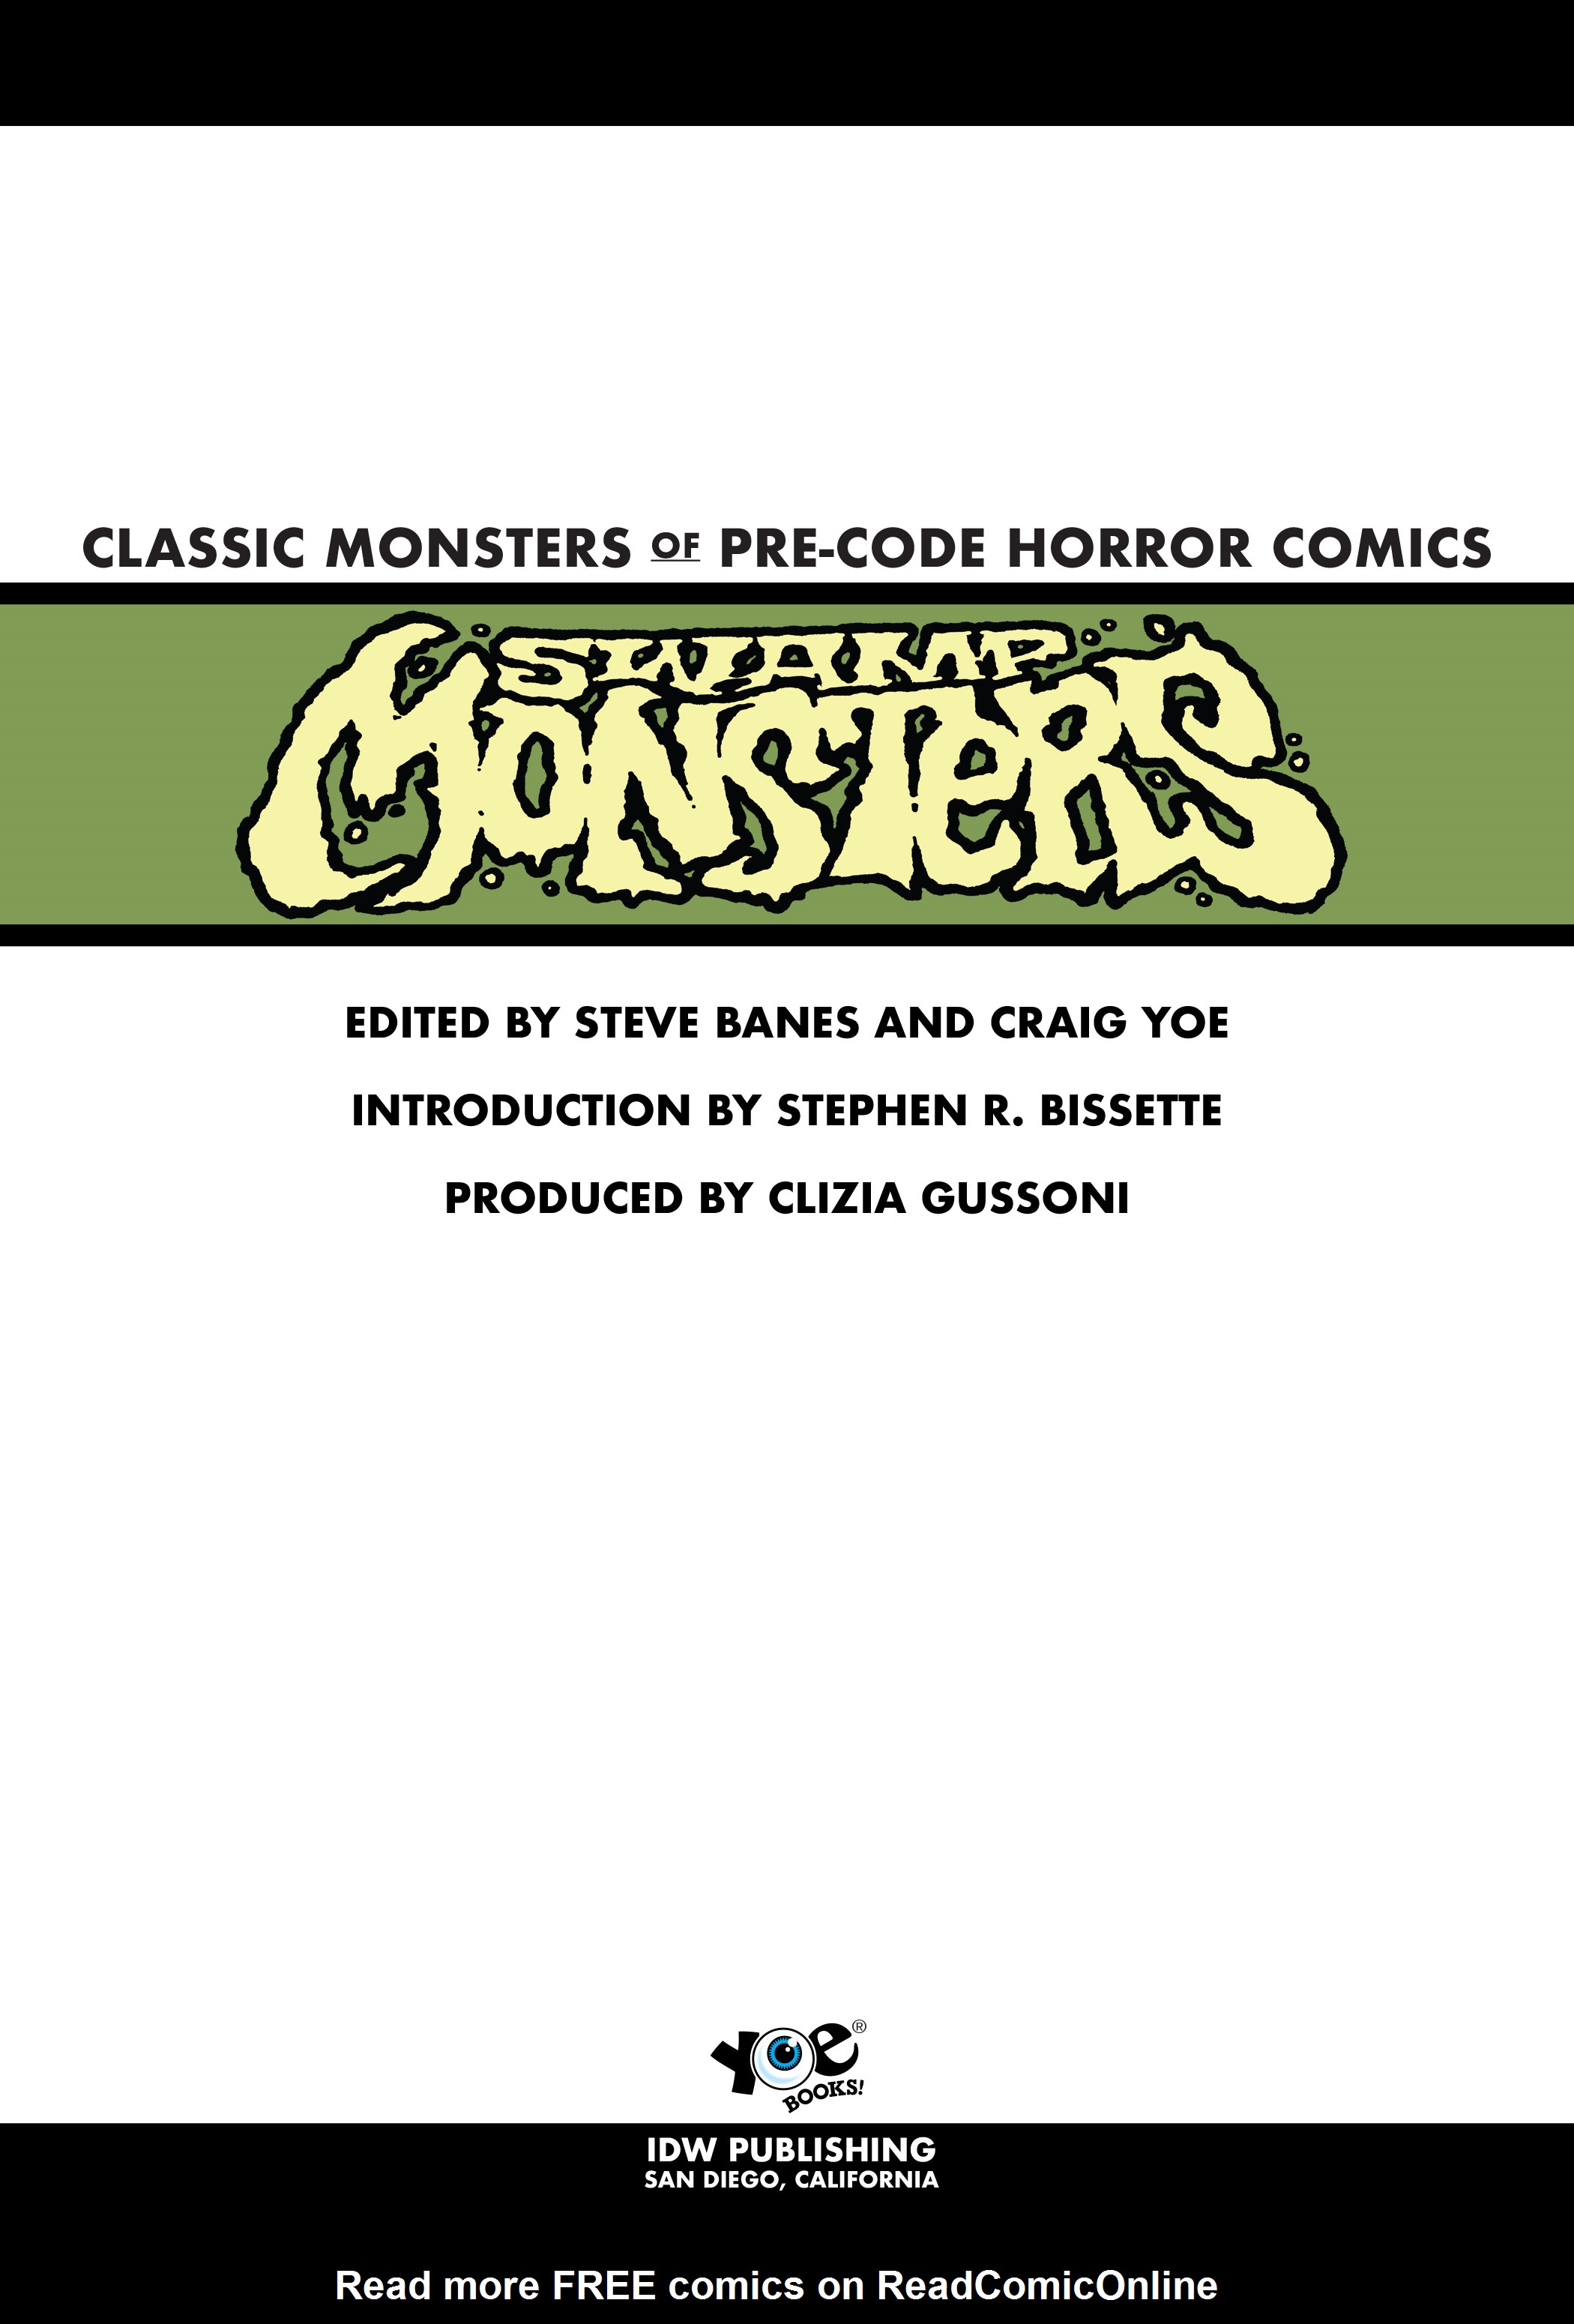 Read online Classic Monsters of Pre-Code Horror Comics: Swamp Monsters comic -  Issue # TPB - 2